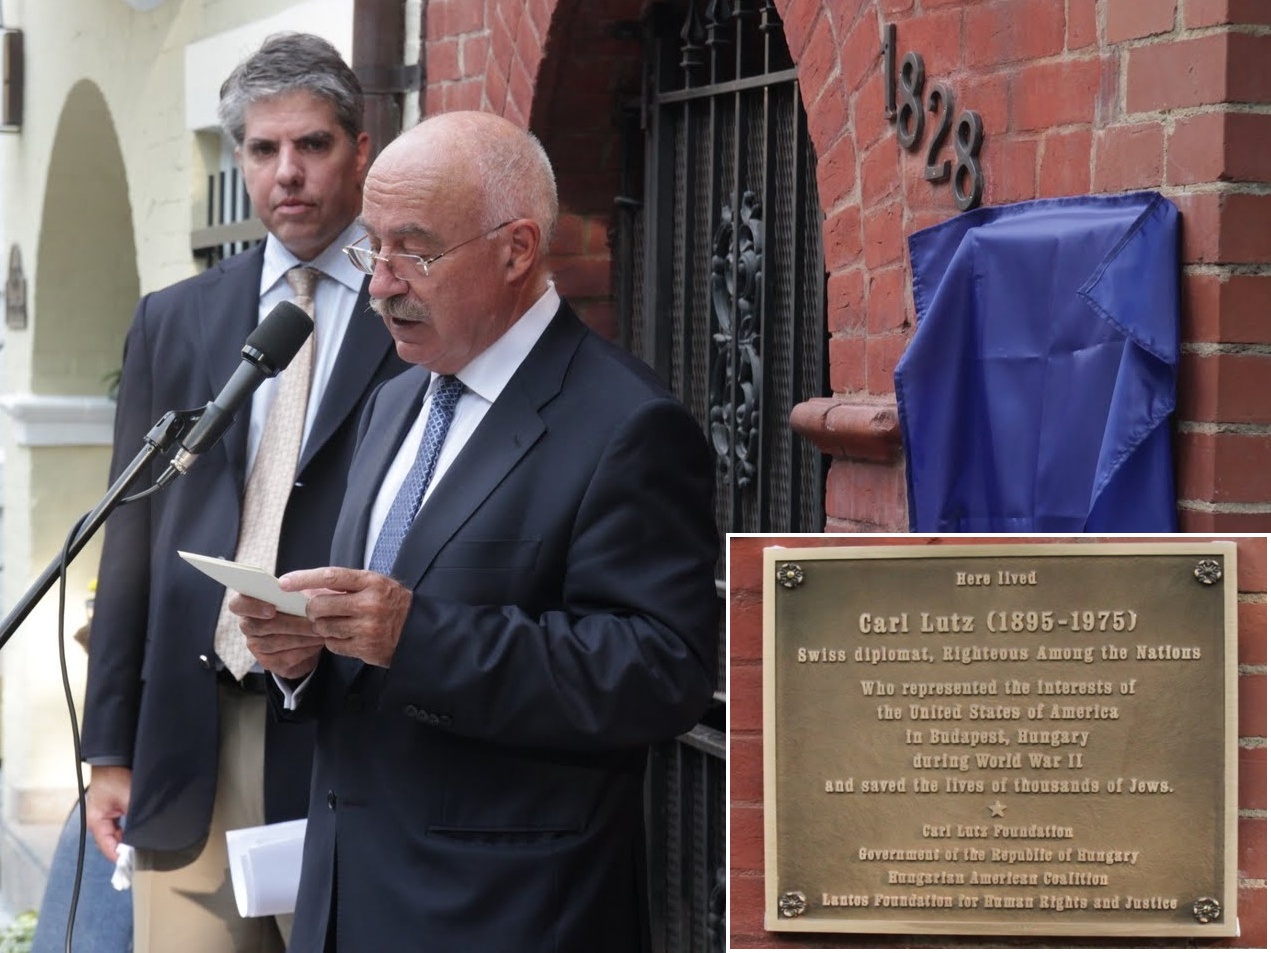 Dr. János Martonyi giving a speech at the Dedication of a Commemorative Plaque on Carl Lutz’s Residence in Washington, DC on June 24, 2010